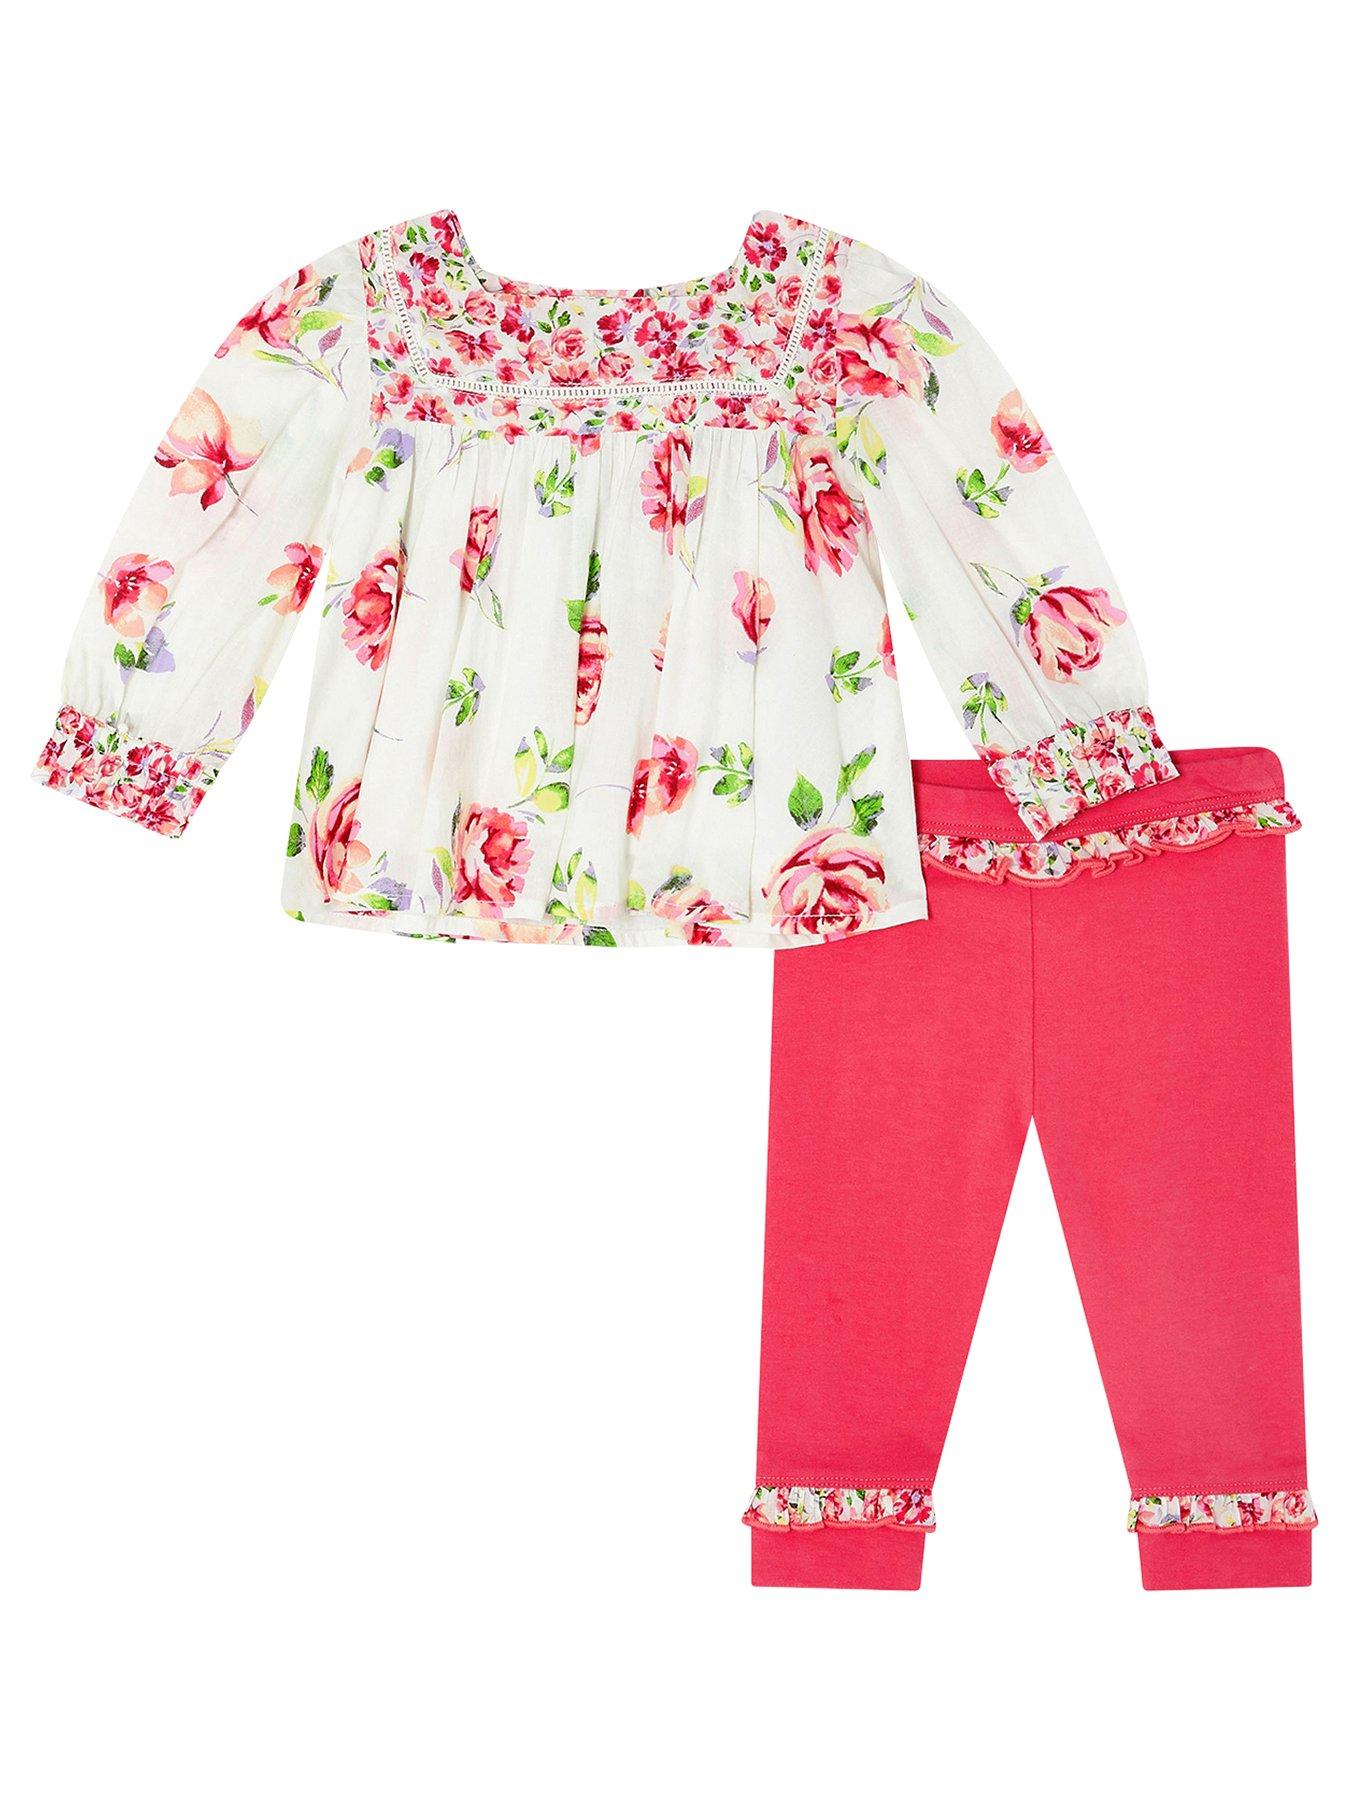 Baby Clothes Baby Girls S.e.w. Floral Woven Short Sleeve Top Set - Pink